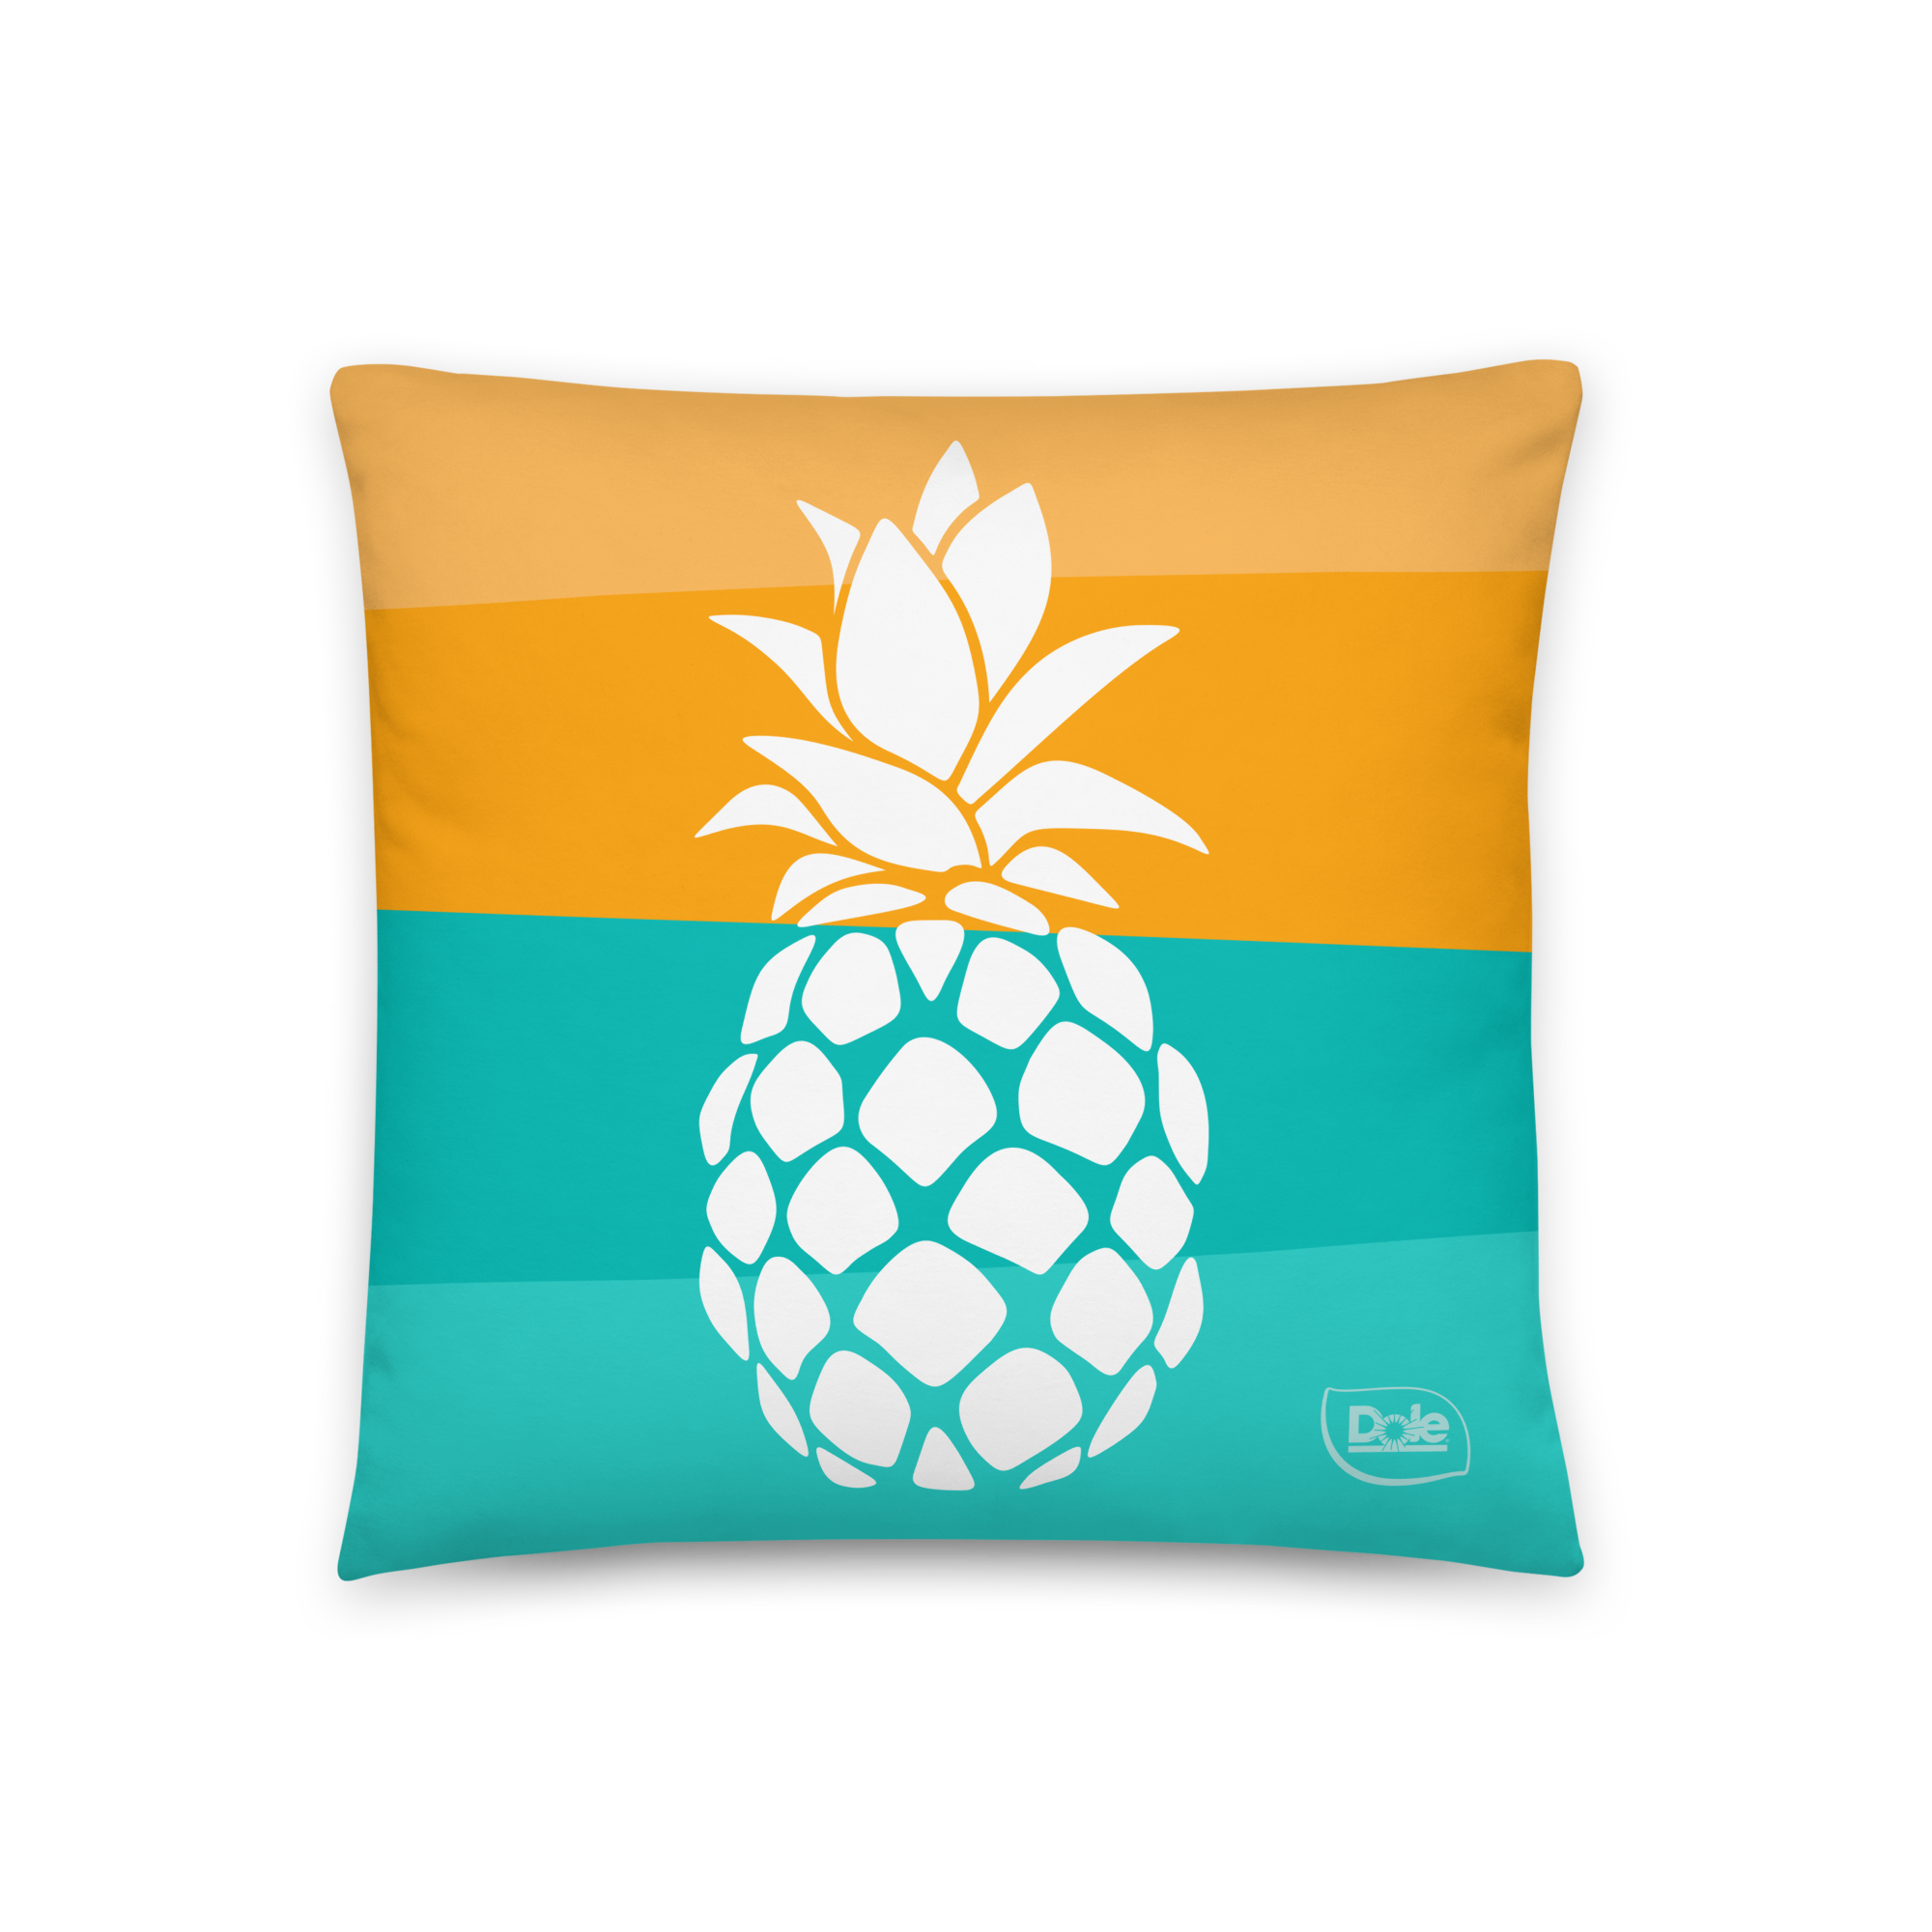 Clearance – The Blank Pineapple